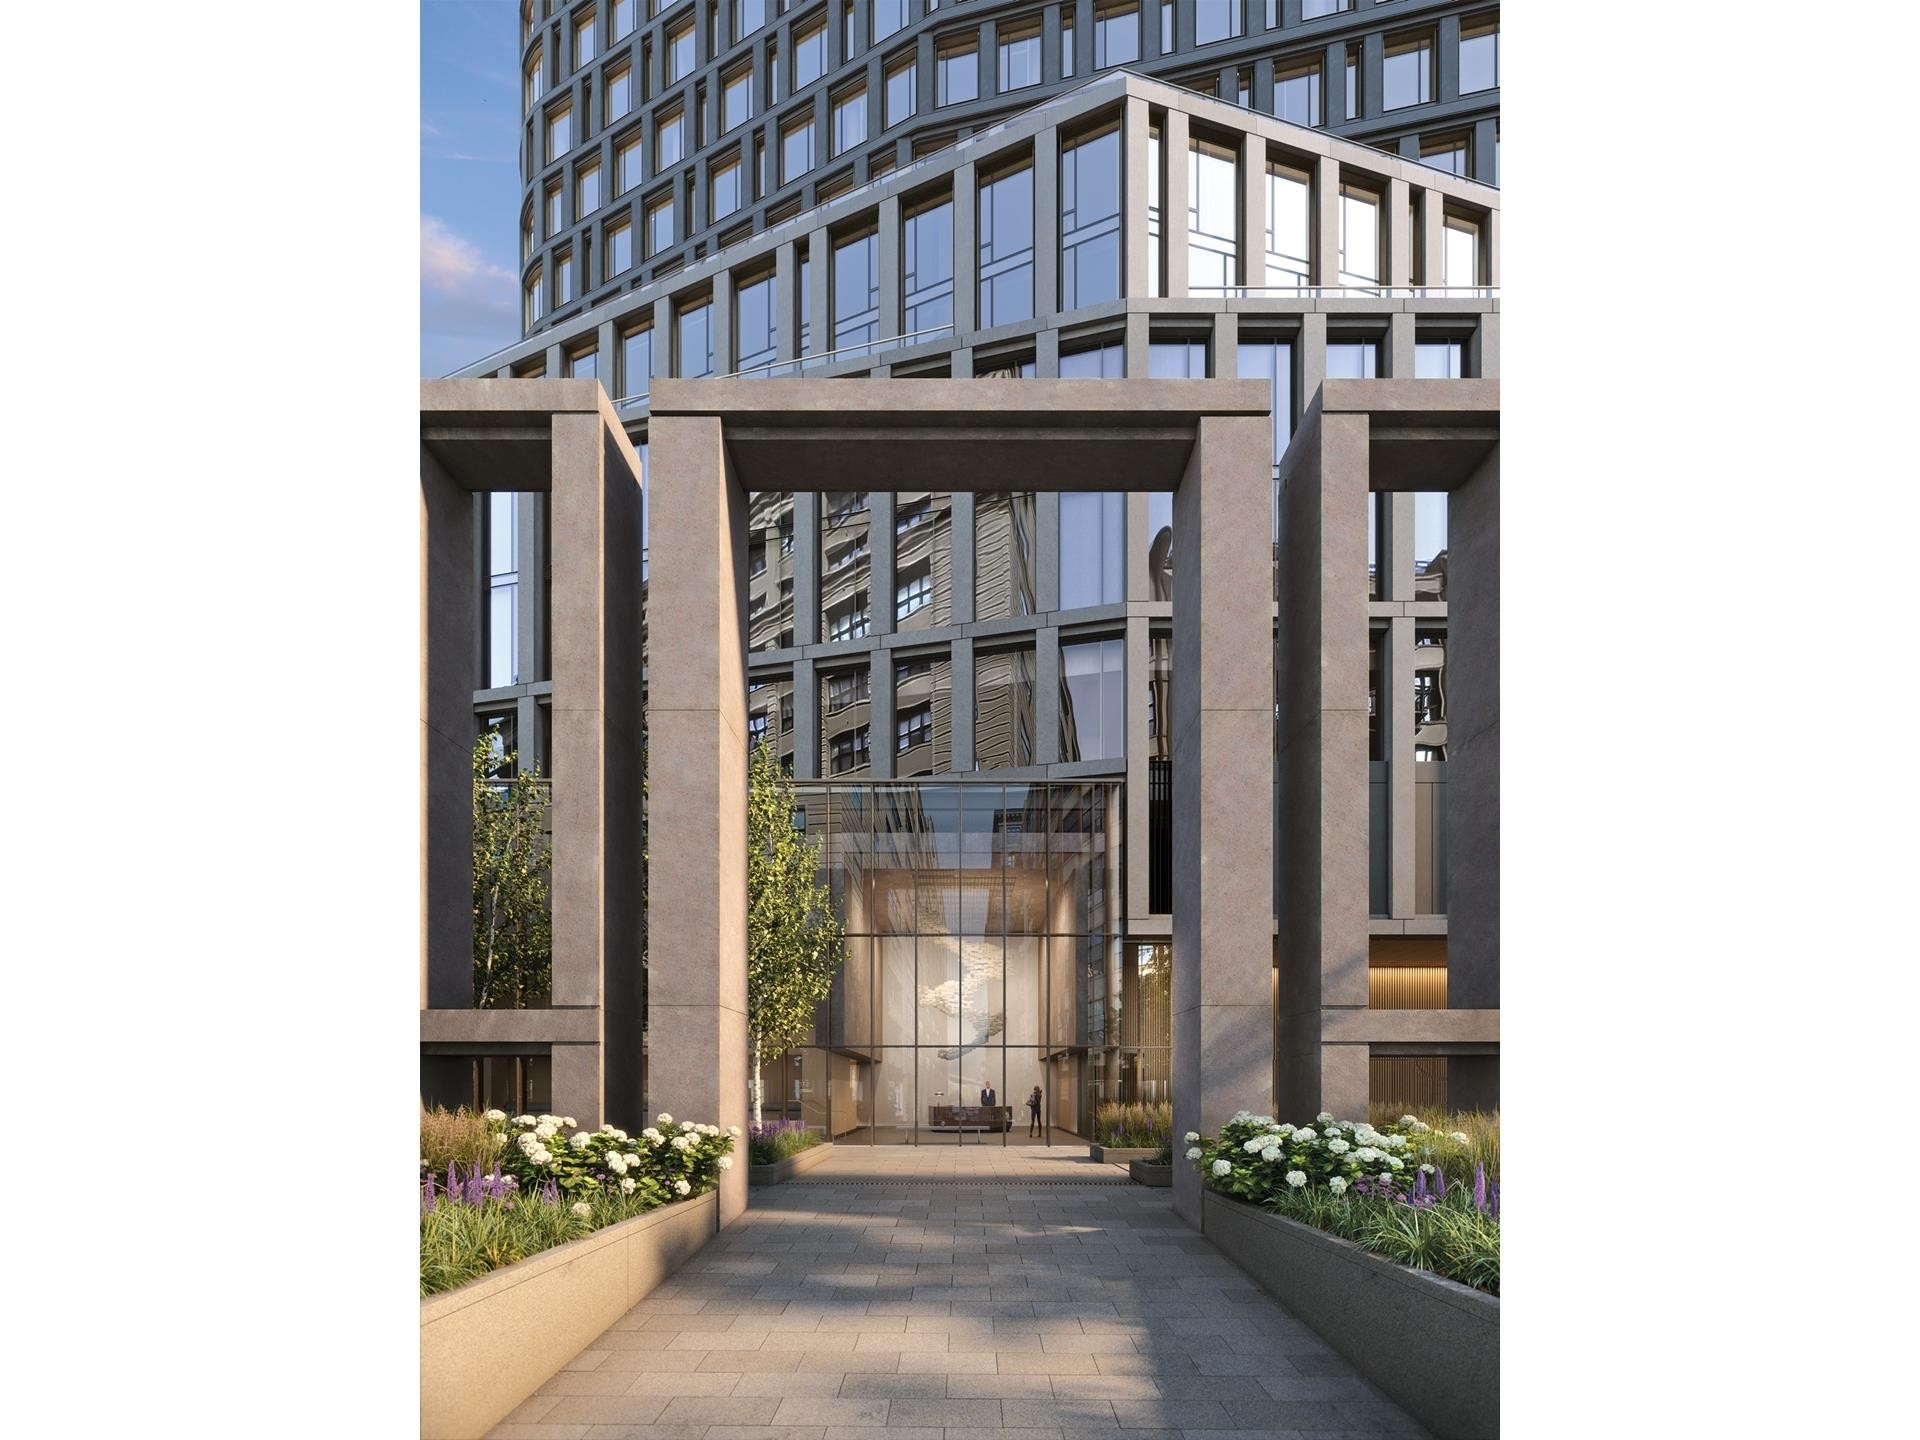 14. Condominiums for Sale at Olympia Dumbo, 30 FRONT ST, 21A Brooklyn, NY 11201